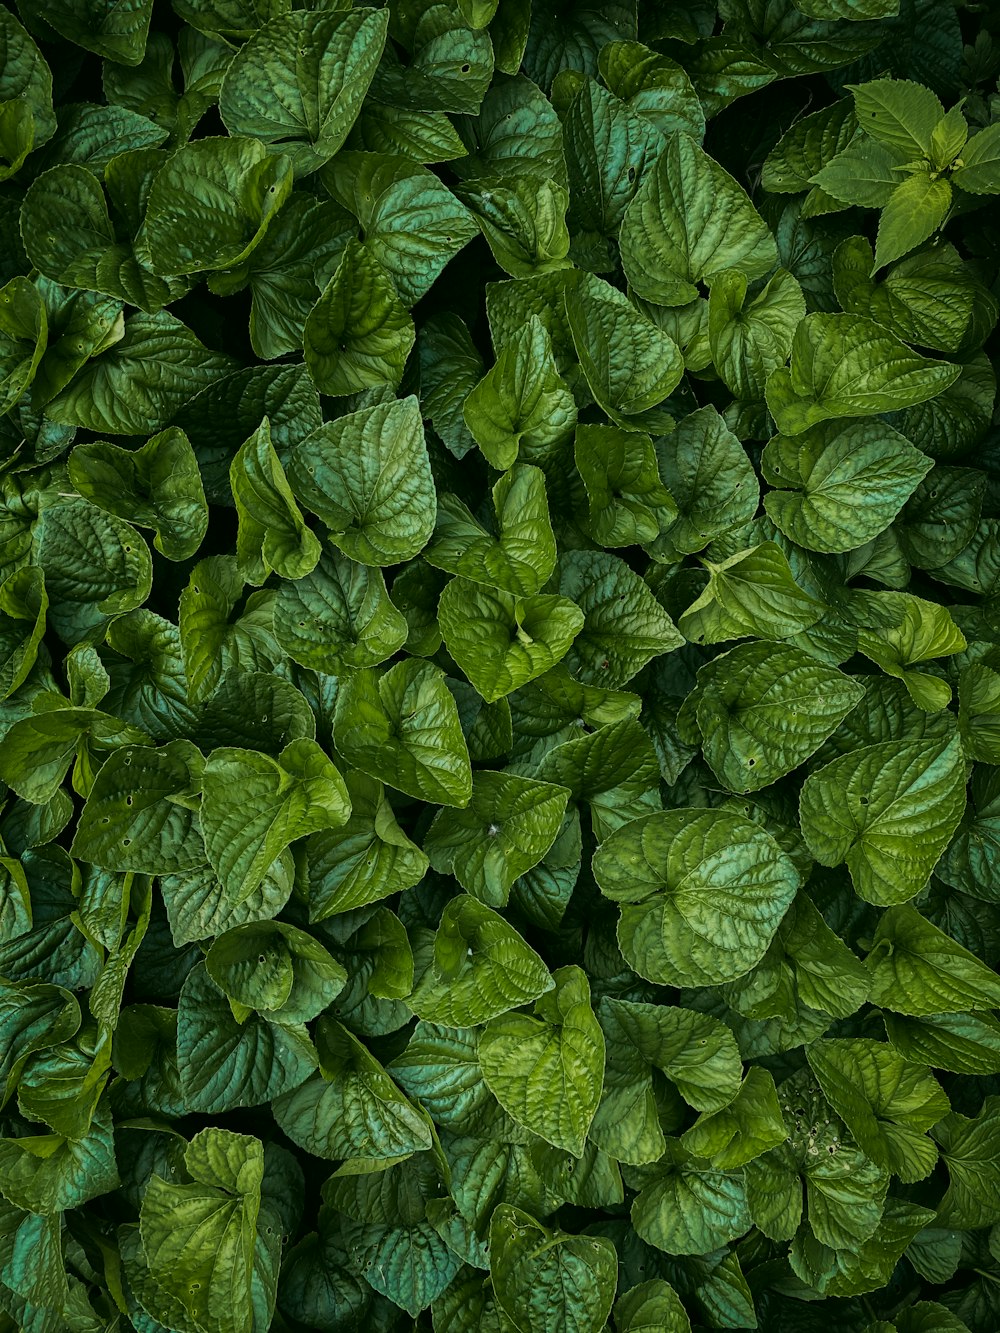 a large pile of green leaves